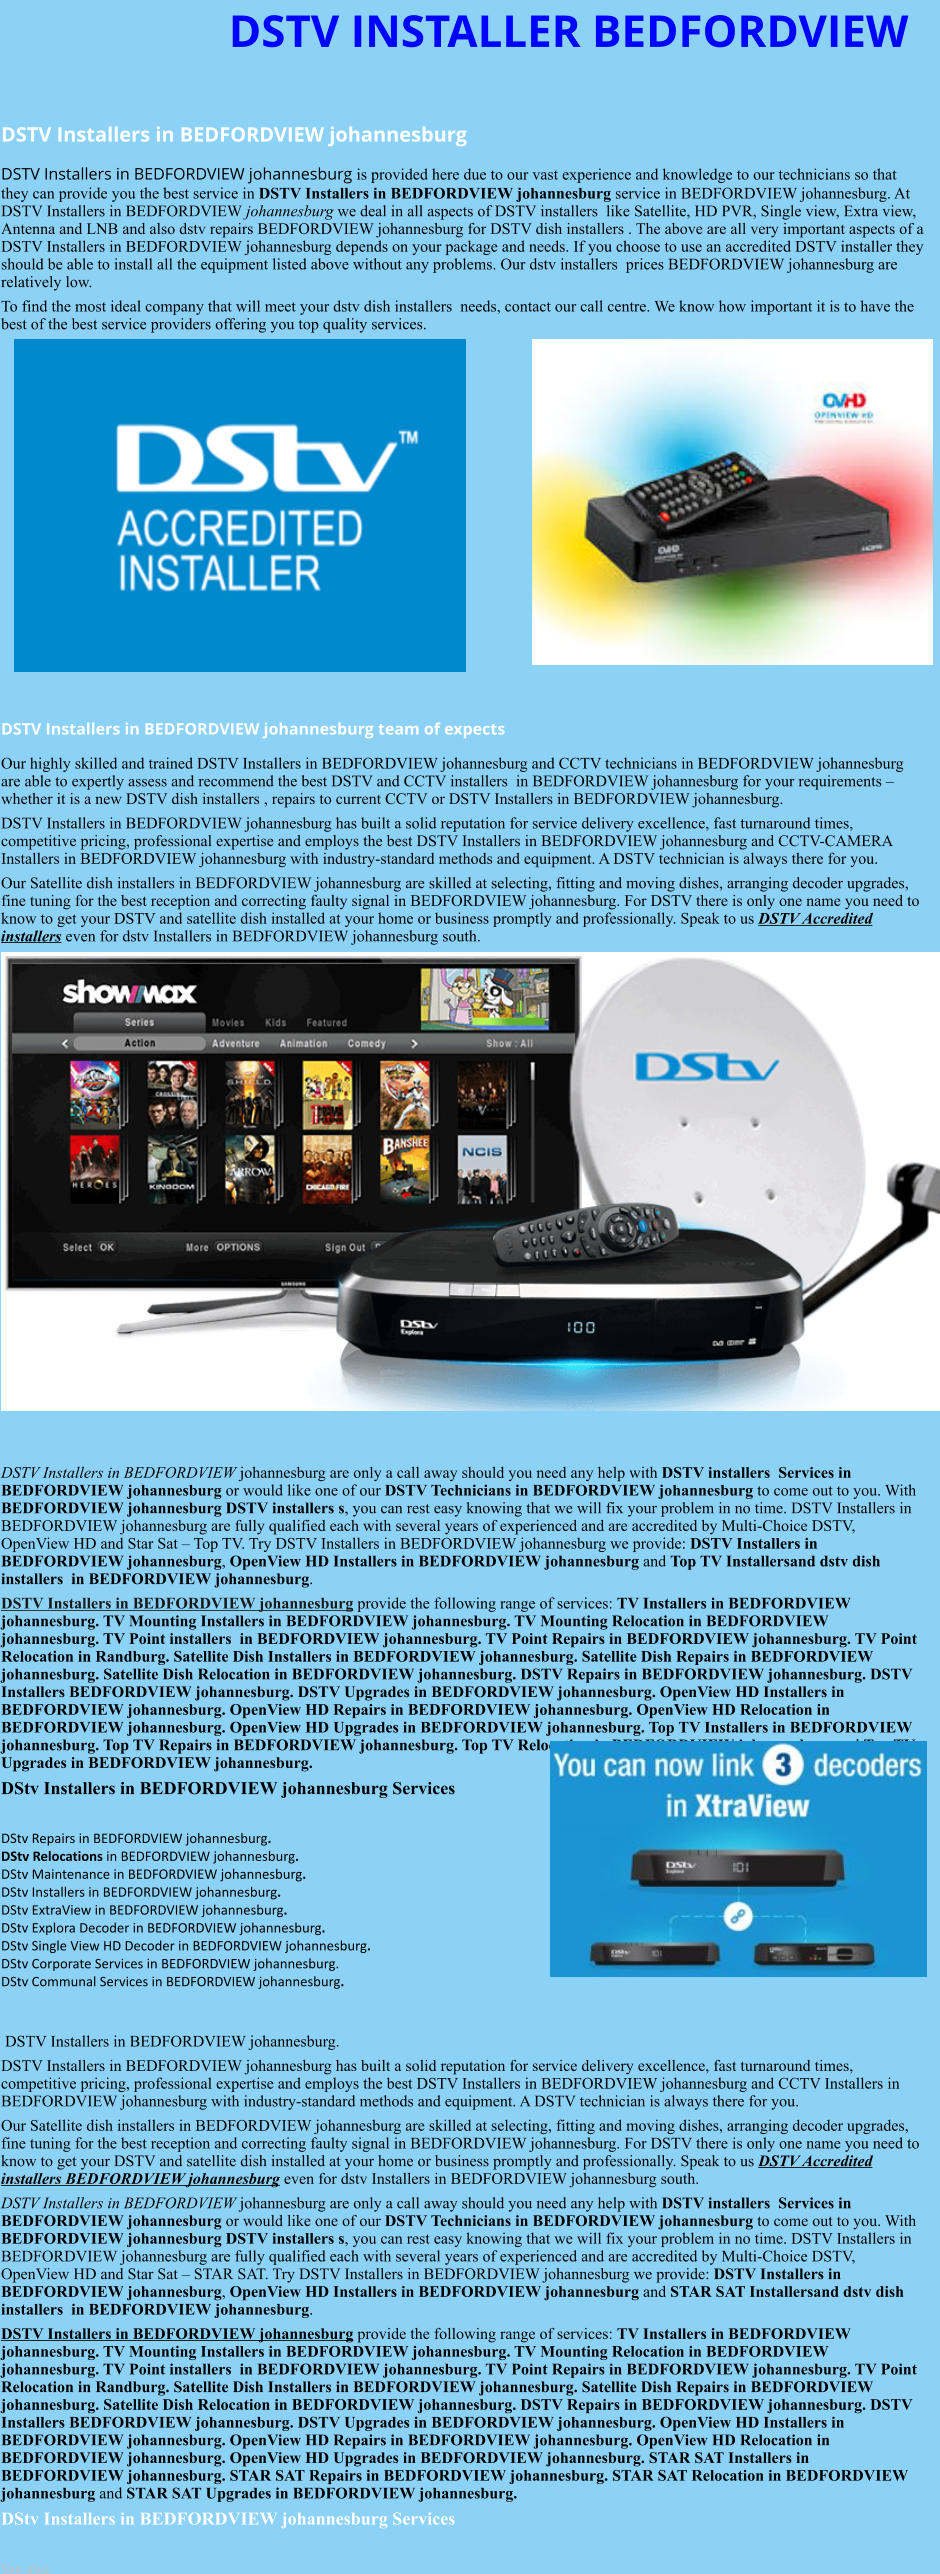 DSTV INSTALLER BEDFORDVIEW  DSTV Installers in BEDFORDVIEW johannesburg  DSTV Installers in BEDFORDVIEW johannesburg is provided here due to our vast experience and knowledge to our technicians so that they can provide you the best service in DSTV Installers in BEDFORDVIEW johannesburg service in BEDFORDVIEW johannesburg. At DSTV Installers in BEDFORDVIEW johannesburg we deal in all aspects of DSTV installers  like Satellite, HD PVR, Single view, Extra view, Antenna and LNB and also dstv repairs BEDFORDVIEW johannesburg for DSTV dish installers . The above are all very important aspects of a DSTV Installers in BEDFORDVIEW johannesburg depends on your package and needs. If you choose to use an accredited DSTV installer they should be able to install all the equipment listed above without any problems. Our dstv installers  prices BEDFORDVIEW johannesburg are relatively low. To find the most ideal company that will meet your dstv dish installers  needs, contact our call centre. We know how important it is to have the best of the best service providers offering you top quality services.                DSTV Installers in BEDFORDVIEW johannesburg team of expects Our highly skilled and trained DSTV Installers in BEDFORDVIEW johannesburg and CCTV technicians in BEDFORDVIEW johannesburg are able to expertly assess and recommend the best DSTV and CCTV installers  in BEDFORDVIEW johannesburg for your requirements – whether it is a new DSTV dish installers , repairs to current CCTV or DSTV Installers in BEDFORDVIEW johannesburg. DSTV Installers in BEDFORDVIEW johannesburg has built a solid reputation for service delivery excellence, fast turnaround times, competitive pricing, professional expertise and employs the best DSTV Installers in BEDFORDVIEW johannesburg and CCTV-CAMERA Installers in BEDFORDVIEW johannesburg with industry-standard methods and equipment. A DSTV technician is always there for you. Our Satellite dish installers in BEDFORDVIEW johannesburg are skilled at selecting, fitting and moving dishes, arranging decoder upgrades, fine tuning for the best reception and correcting faulty signal in BEDFORDVIEW johannesburg. For DSTV there is only one name you need to know to get your DSTV and satellite dish installed at your home or business promptly and professionally. Speak to us DSTV Accredited installers even for dstv Installers in BEDFORDVIEW johannesburg south.                      DSTV Installers in BEDFORDVIEW johannesburg are only a call away should you need any help with DSTV installers  Services in BEDFORDVIEW johannesburg or would like one of our DSTV Technicians in BEDFORDVIEW johannesburg to come out to you. With BEDFORDVIEW johannesburg DSTV installers s, you can rest easy knowing that we will fix your problem in no time. DSTV Installers in BEDFORDVIEW johannesburg are fully qualified each with several years of experienced and are accredited by Multi-Choice DSTV, OpenView HD and Star Sat – Top TV. Try DSTV Installers in BEDFORDVIEW johannesburg we provide: DSTV Installers in BEDFORDVIEW johannesburg, OpenView HD Installers in BEDFORDVIEW johannesburg and Top TV Installersand dstv dish installers  in BEDFORDVIEW johannesburg. DSTV Installers in BEDFORDVIEW johannesburg provide the following range of services: TV Installers in BEDFORDVIEW johannesburg. TV Mounting Installers in BEDFORDVIEW johannesburg. TV Mounting Relocation in BEDFORDVIEW johannesburg. TV Point installers  in BEDFORDVIEW johannesburg. TV Point Repairs in BEDFORDVIEW johannesburg. TV Point Relocation in Randburg. Satellite Dish Installers in BEDFORDVIEW johannesburg. Satellite Dish Repairs in BEDFORDVIEW johannesburg. Satellite Dish Relocation in BEDFORDVIEW johannesburg. DSTV Repairs in BEDFORDVIEW johannesburg. DSTV Installers BEDFORDVIEW johannesburg. DSTV Upgrades in BEDFORDVIEW johannesburg. OpenView HD Installers in BEDFORDVIEW johannesburg. OpenView HD Repairs in BEDFORDVIEW johannesburg. OpenView HD Relocation in BEDFORDVIEW johannesburg. OpenView HD Upgrades in BEDFORDVIEW johannesburg. Top TV Installers in BEDFORDVIEW johannesburg. Top TV Repairs in BEDFORDVIEW johannesburg. Top TV Relocation in BEDFORDVIEW johannesburg and Top TV Upgrades in BEDFORDVIEW johannesburg. DStv Installers in BEDFORDVIEW johannesburg Services  DStv Repairs in BEDFORDVIEW johannesburg.  DStv Relocations in BEDFORDVIEW johannesburg.  DStv Maintenance in BEDFORDVIEW johannesburg. DStv Installers in BEDFORDVIEW johannesburg. DStv ExtraView in BEDFORDVIEW johannesburg. DStv Explora Decoder in BEDFORDVIEW johannesburg. DStv Single View HD Decoder in BEDFORDVIEW johannesburg. DStv Corporate Services in BEDFORDVIEW johannesburg. DStv Communal Services in BEDFORDVIEW johannesburg.    DSTV Installers in BEDFORDVIEW johannesburg. DSTV Installers in BEDFORDVIEW johannesburg has built a solid reputation for service delivery excellence, fast turnaround times, competitive pricing, professional expertise and employs the best DSTV Installers in BEDFORDVIEW johannesburg and CCTV Installers in BEDFORDVIEW johannesburg with industry-standard methods and equipment. A DSTV technician is always there for you. Our Satellite dish installers in BEDFORDVIEW johannesburg are skilled at selecting, fitting and moving dishes, arranging decoder upgrades, fine tuning for the best reception and correcting faulty signal in BEDFORDVIEW johannesburg. For DSTV there is only one name you need to know to get your DSTV and satellite dish installed at your home or business promptly and professionally. Speak to us DSTV Accredited installers BEDFORDVIEW johannesburg even for dstv Installers in BEDFORDVIEW johannesburg south. DSTV Installers in BEDFORDVIEW johannesburg are only a call away should you need any help with DSTV installers  Services in BEDFORDVIEW johannesburg or would like one of our DSTV Technicians in BEDFORDVIEW johannesburg to come out to you. With BEDFORDVIEW johannesburg DSTV installers s, you can rest easy knowing that we will fix your problem in no time. DSTV Installers in BEDFORDVIEW johannesburg are fully qualified each with several years of experienced and are accredited by Multi-Choice DSTV, OpenView HD and Star Sat – STAR SAT. Try DSTV Installers in BEDFORDVIEW johannesburg we provide: DSTV Installers in BEDFORDVIEW johannesburg, OpenView HD Installers in BEDFORDVIEW johannesburg and STAR SAT Installersand dstv dish installers  in BEDFORDVIEW johannesburg. DSTV Installers in BEDFORDVIEW johannesburg provide the following range of services: TV Installers in BEDFORDVIEW johannesburg. TV Mounting Installers in BEDFORDVIEW johannesburg. TV Mounting Relocation in BEDFORDVIEW johannesburg. TV Point installers  in BEDFORDVIEW johannesburg. TV Point Repairs in BEDFORDVIEW johannesburg. TV Point Relocation in Randburg. Satellite Dish Installers in BEDFORDVIEW johannesburg. Satellite Dish Repairs in BEDFORDVIEW johannesburg. Satellite Dish Relocation in BEDFORDVIEW johannesburg. DSTV Repairs in BEDFORDVIEW johannesburg. DSTV Installers BEDFORDVIEW johannesburg. DSTV Upgrades in BEDFORDVIEW johannesburg. OpenView HD Installers in BEDFORDVIEW johannesburg. OpenView HD Repairs in BEDFORDVIEW johannesburg. OpenView HD Relocation in BEDFORDVIEW johannesburg. OpenView HD Upgrades in BEDFORDVIEW johannesburg. STAR SAT Installers in BEDFORDVIEW johannesburg. STAR SAT Repairs in BEDFORDVIEW johannesburg. STAR SAT Relocation in BEDFORDVIEW johannesburg and STAR SAT Upgrades in BEDFORDVIEW johannesburg. DStv Installers in BEDFORDVIEW johannesburg Services  See also